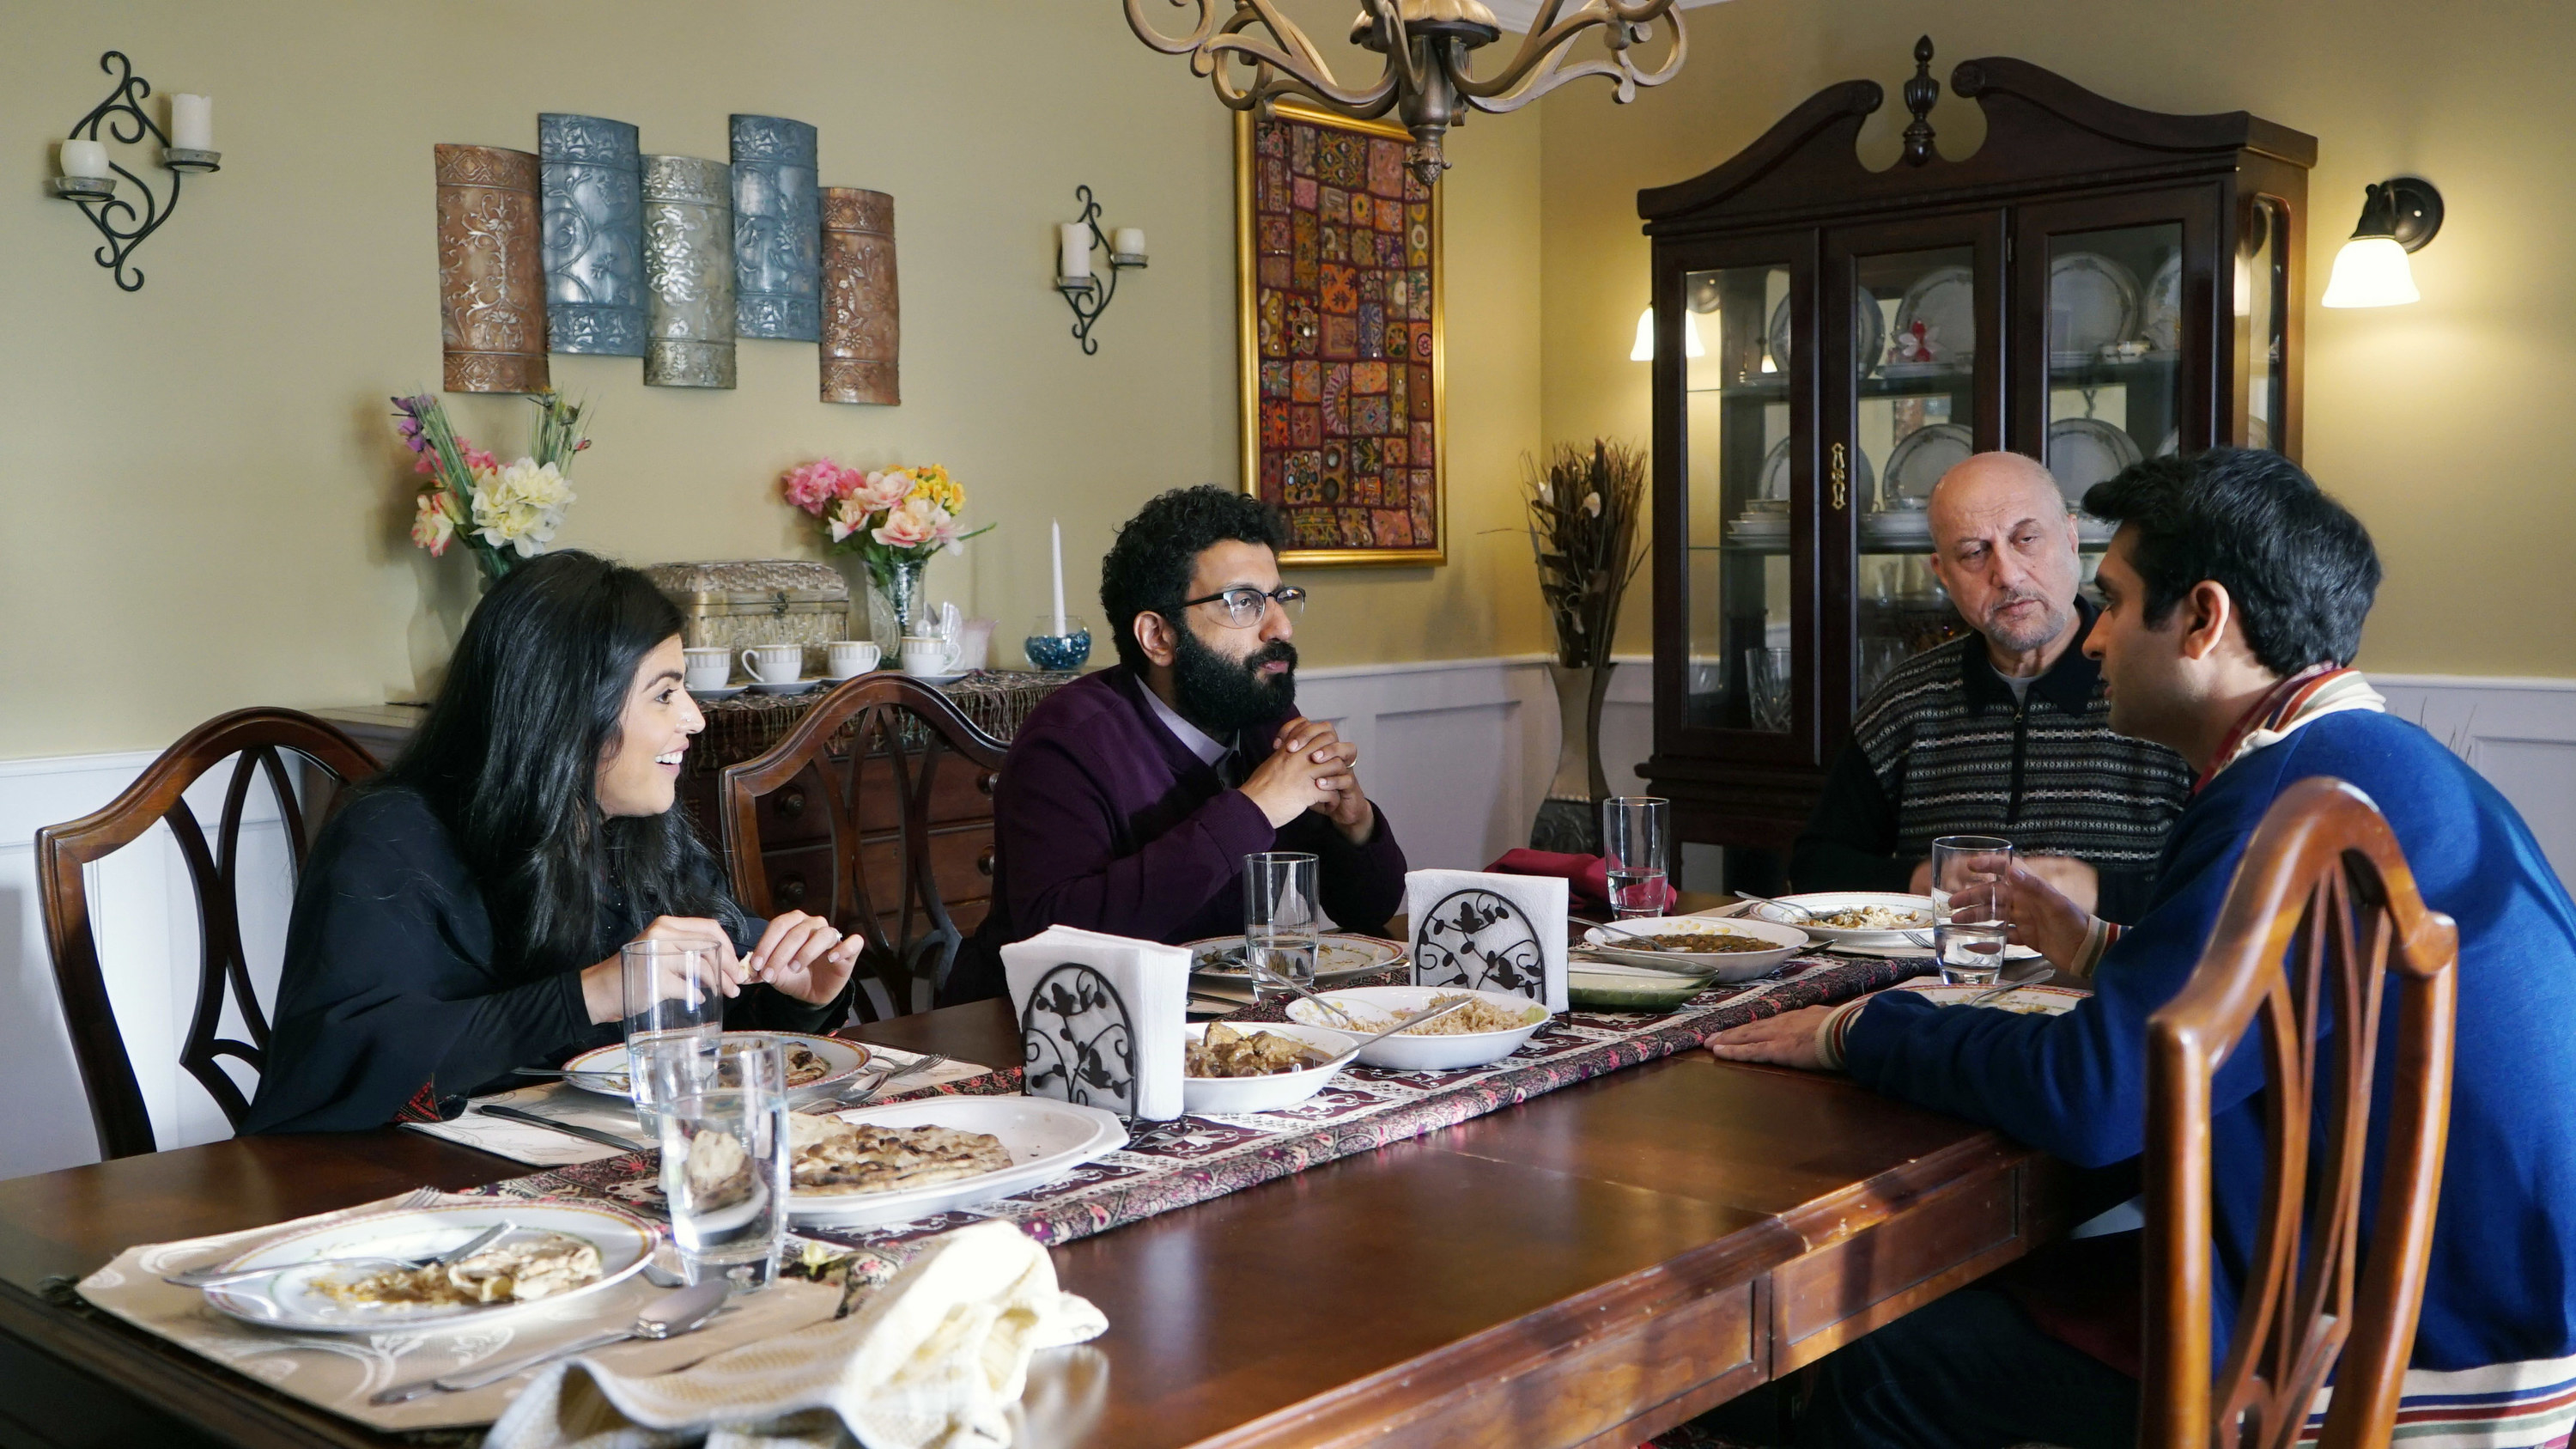 Kumail, his father, and others seated around a table